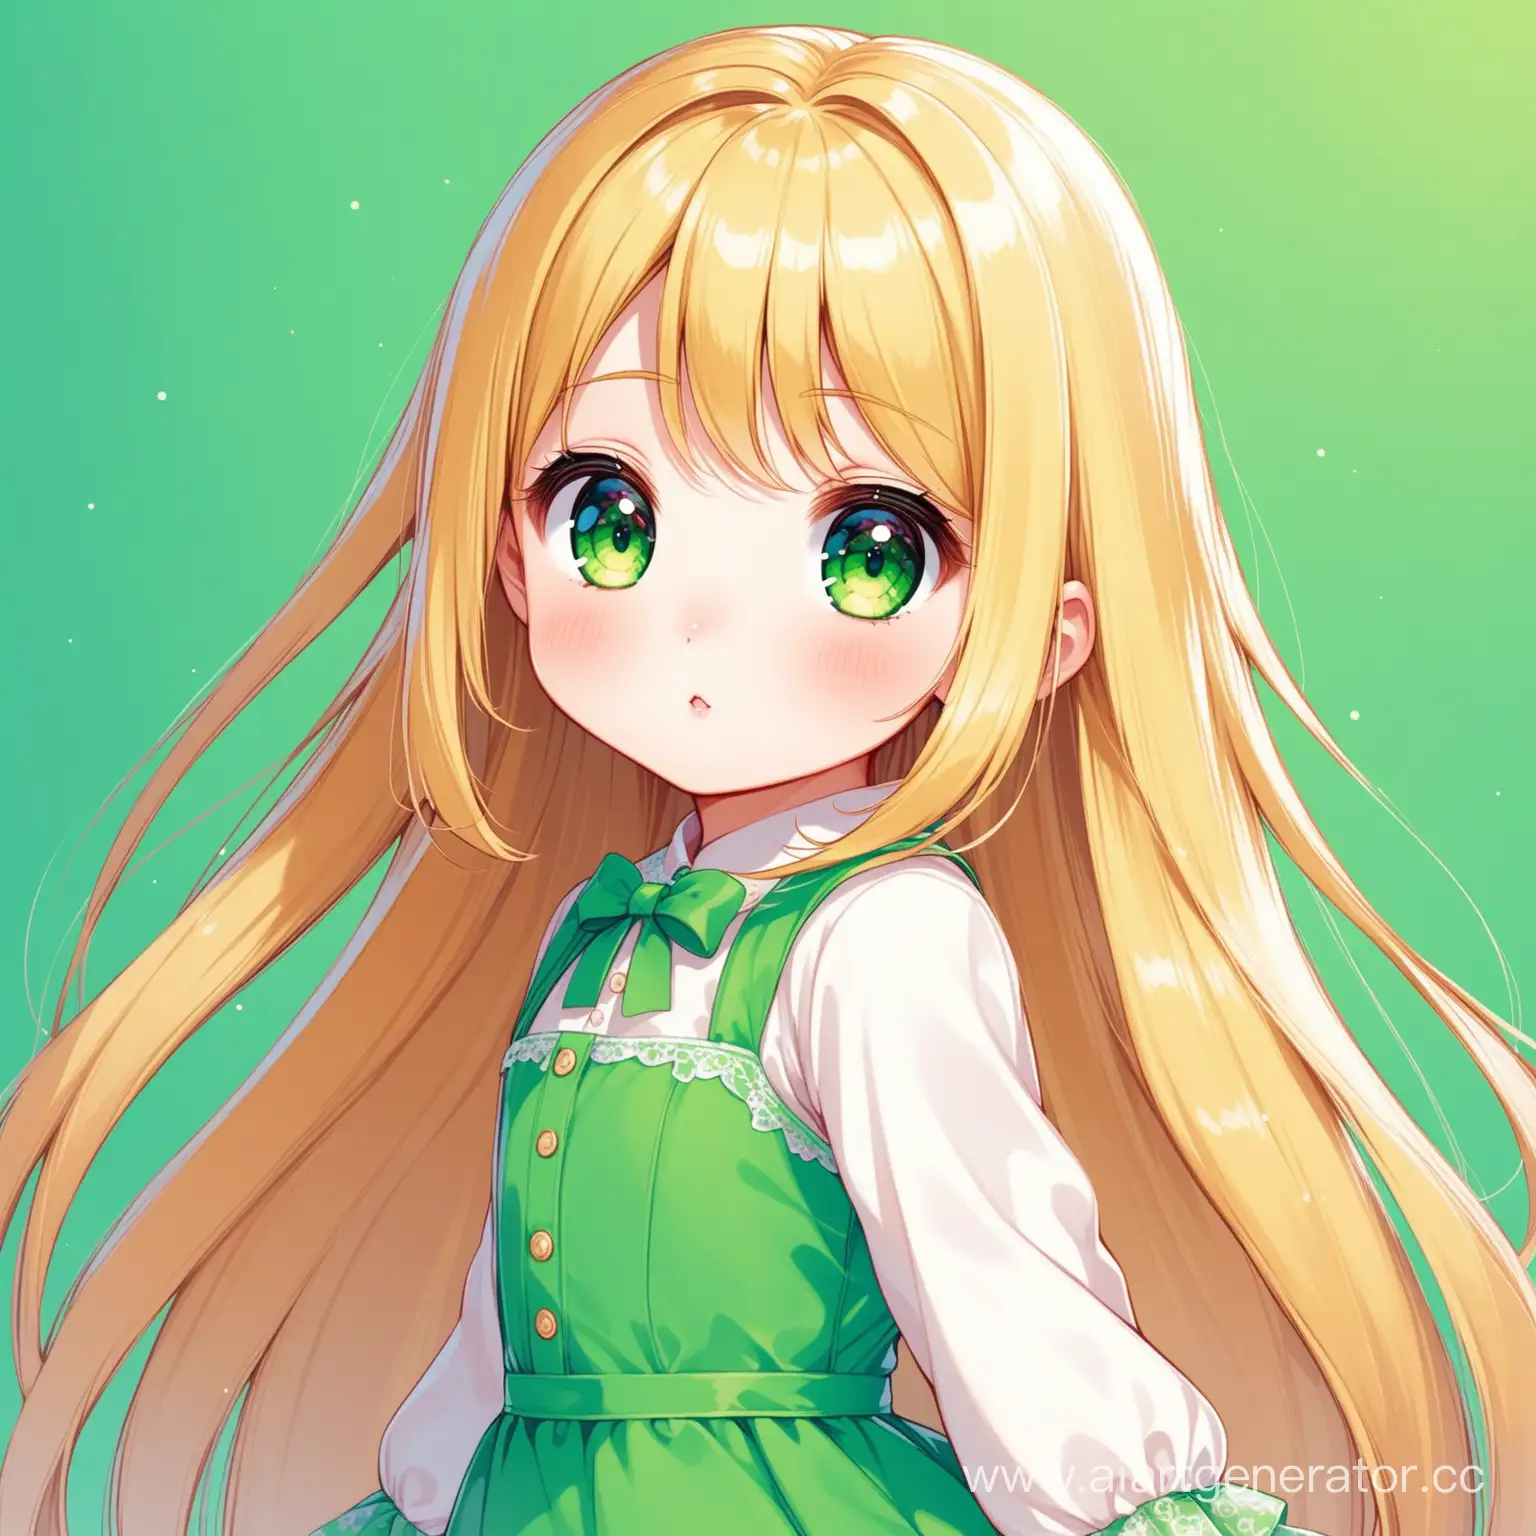 Adorable-Little-Girl-with-Long-Blonde-Hair-and-Big-Green-Eyes-in-Cute-Attire